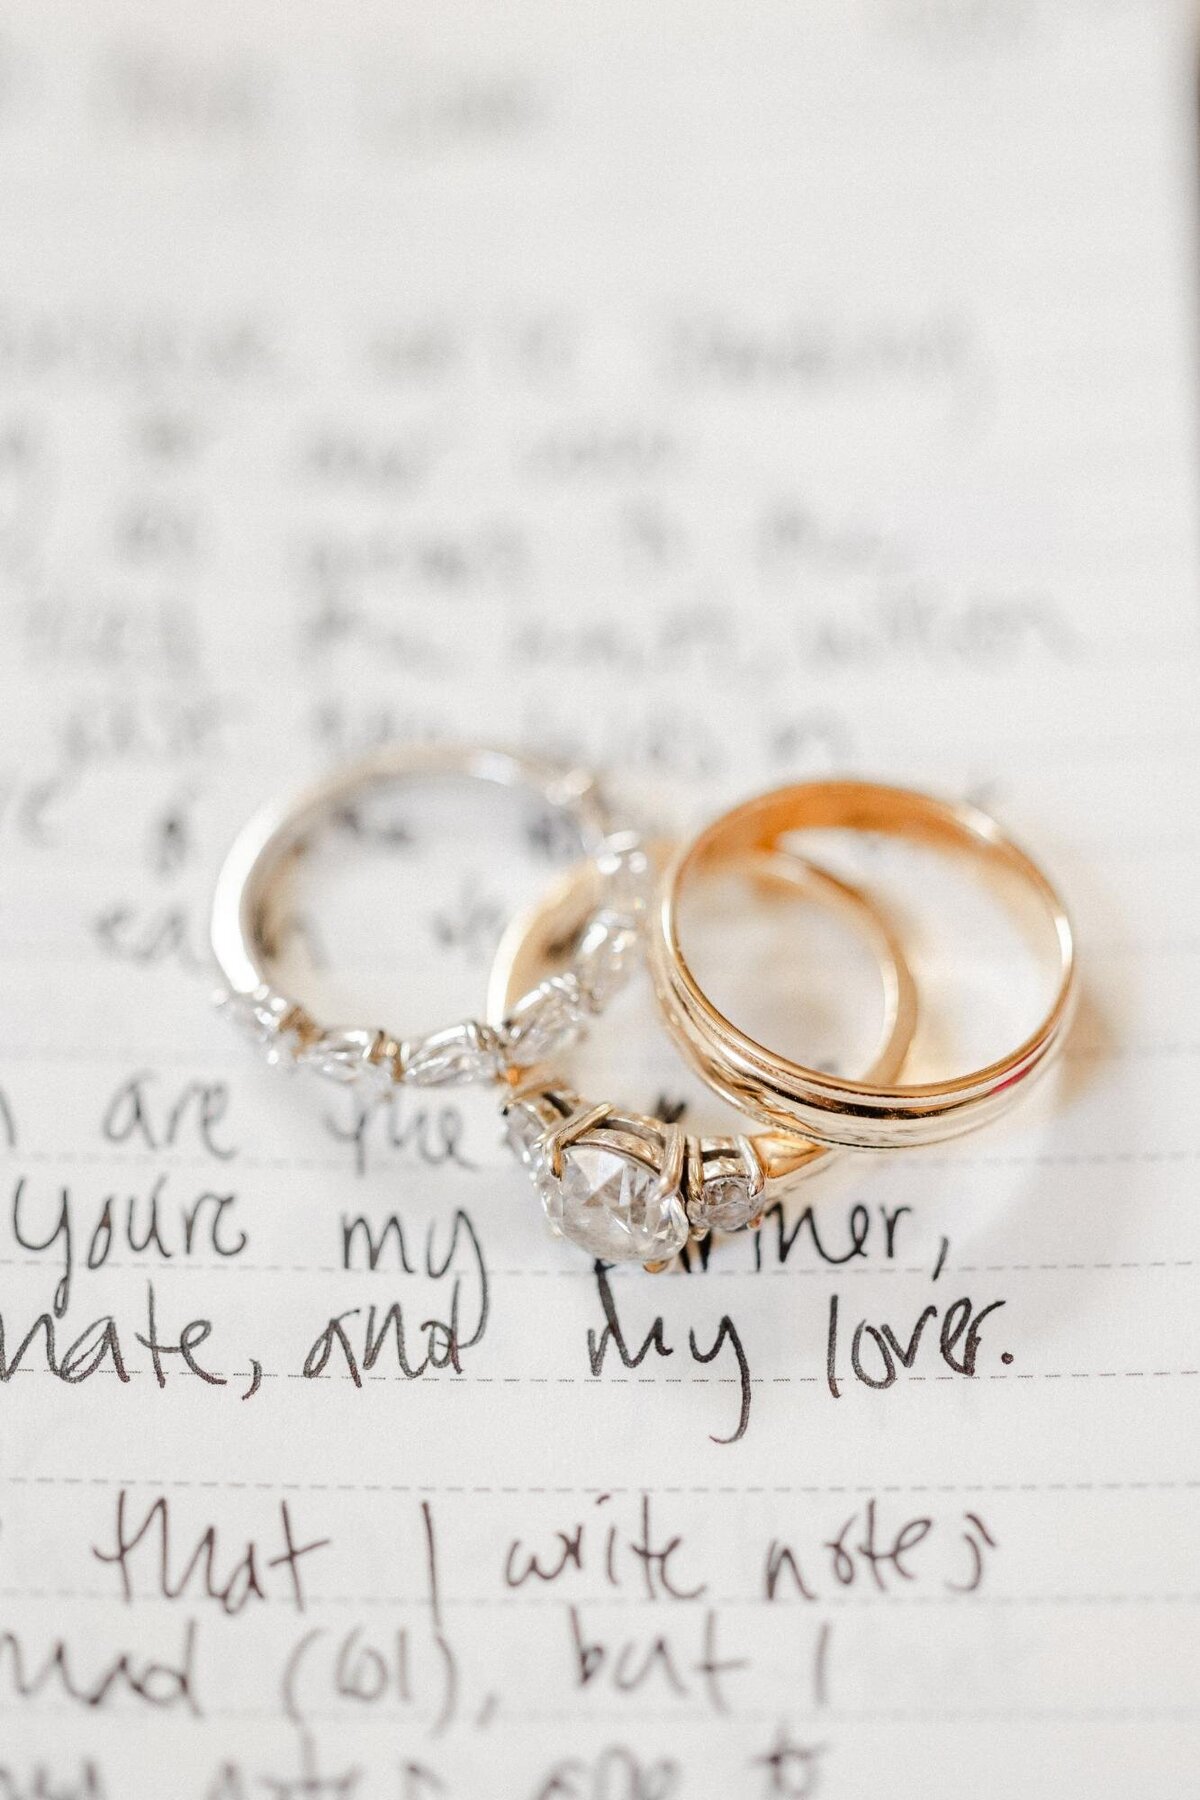 Two wedding rings atop a handwritten love note.